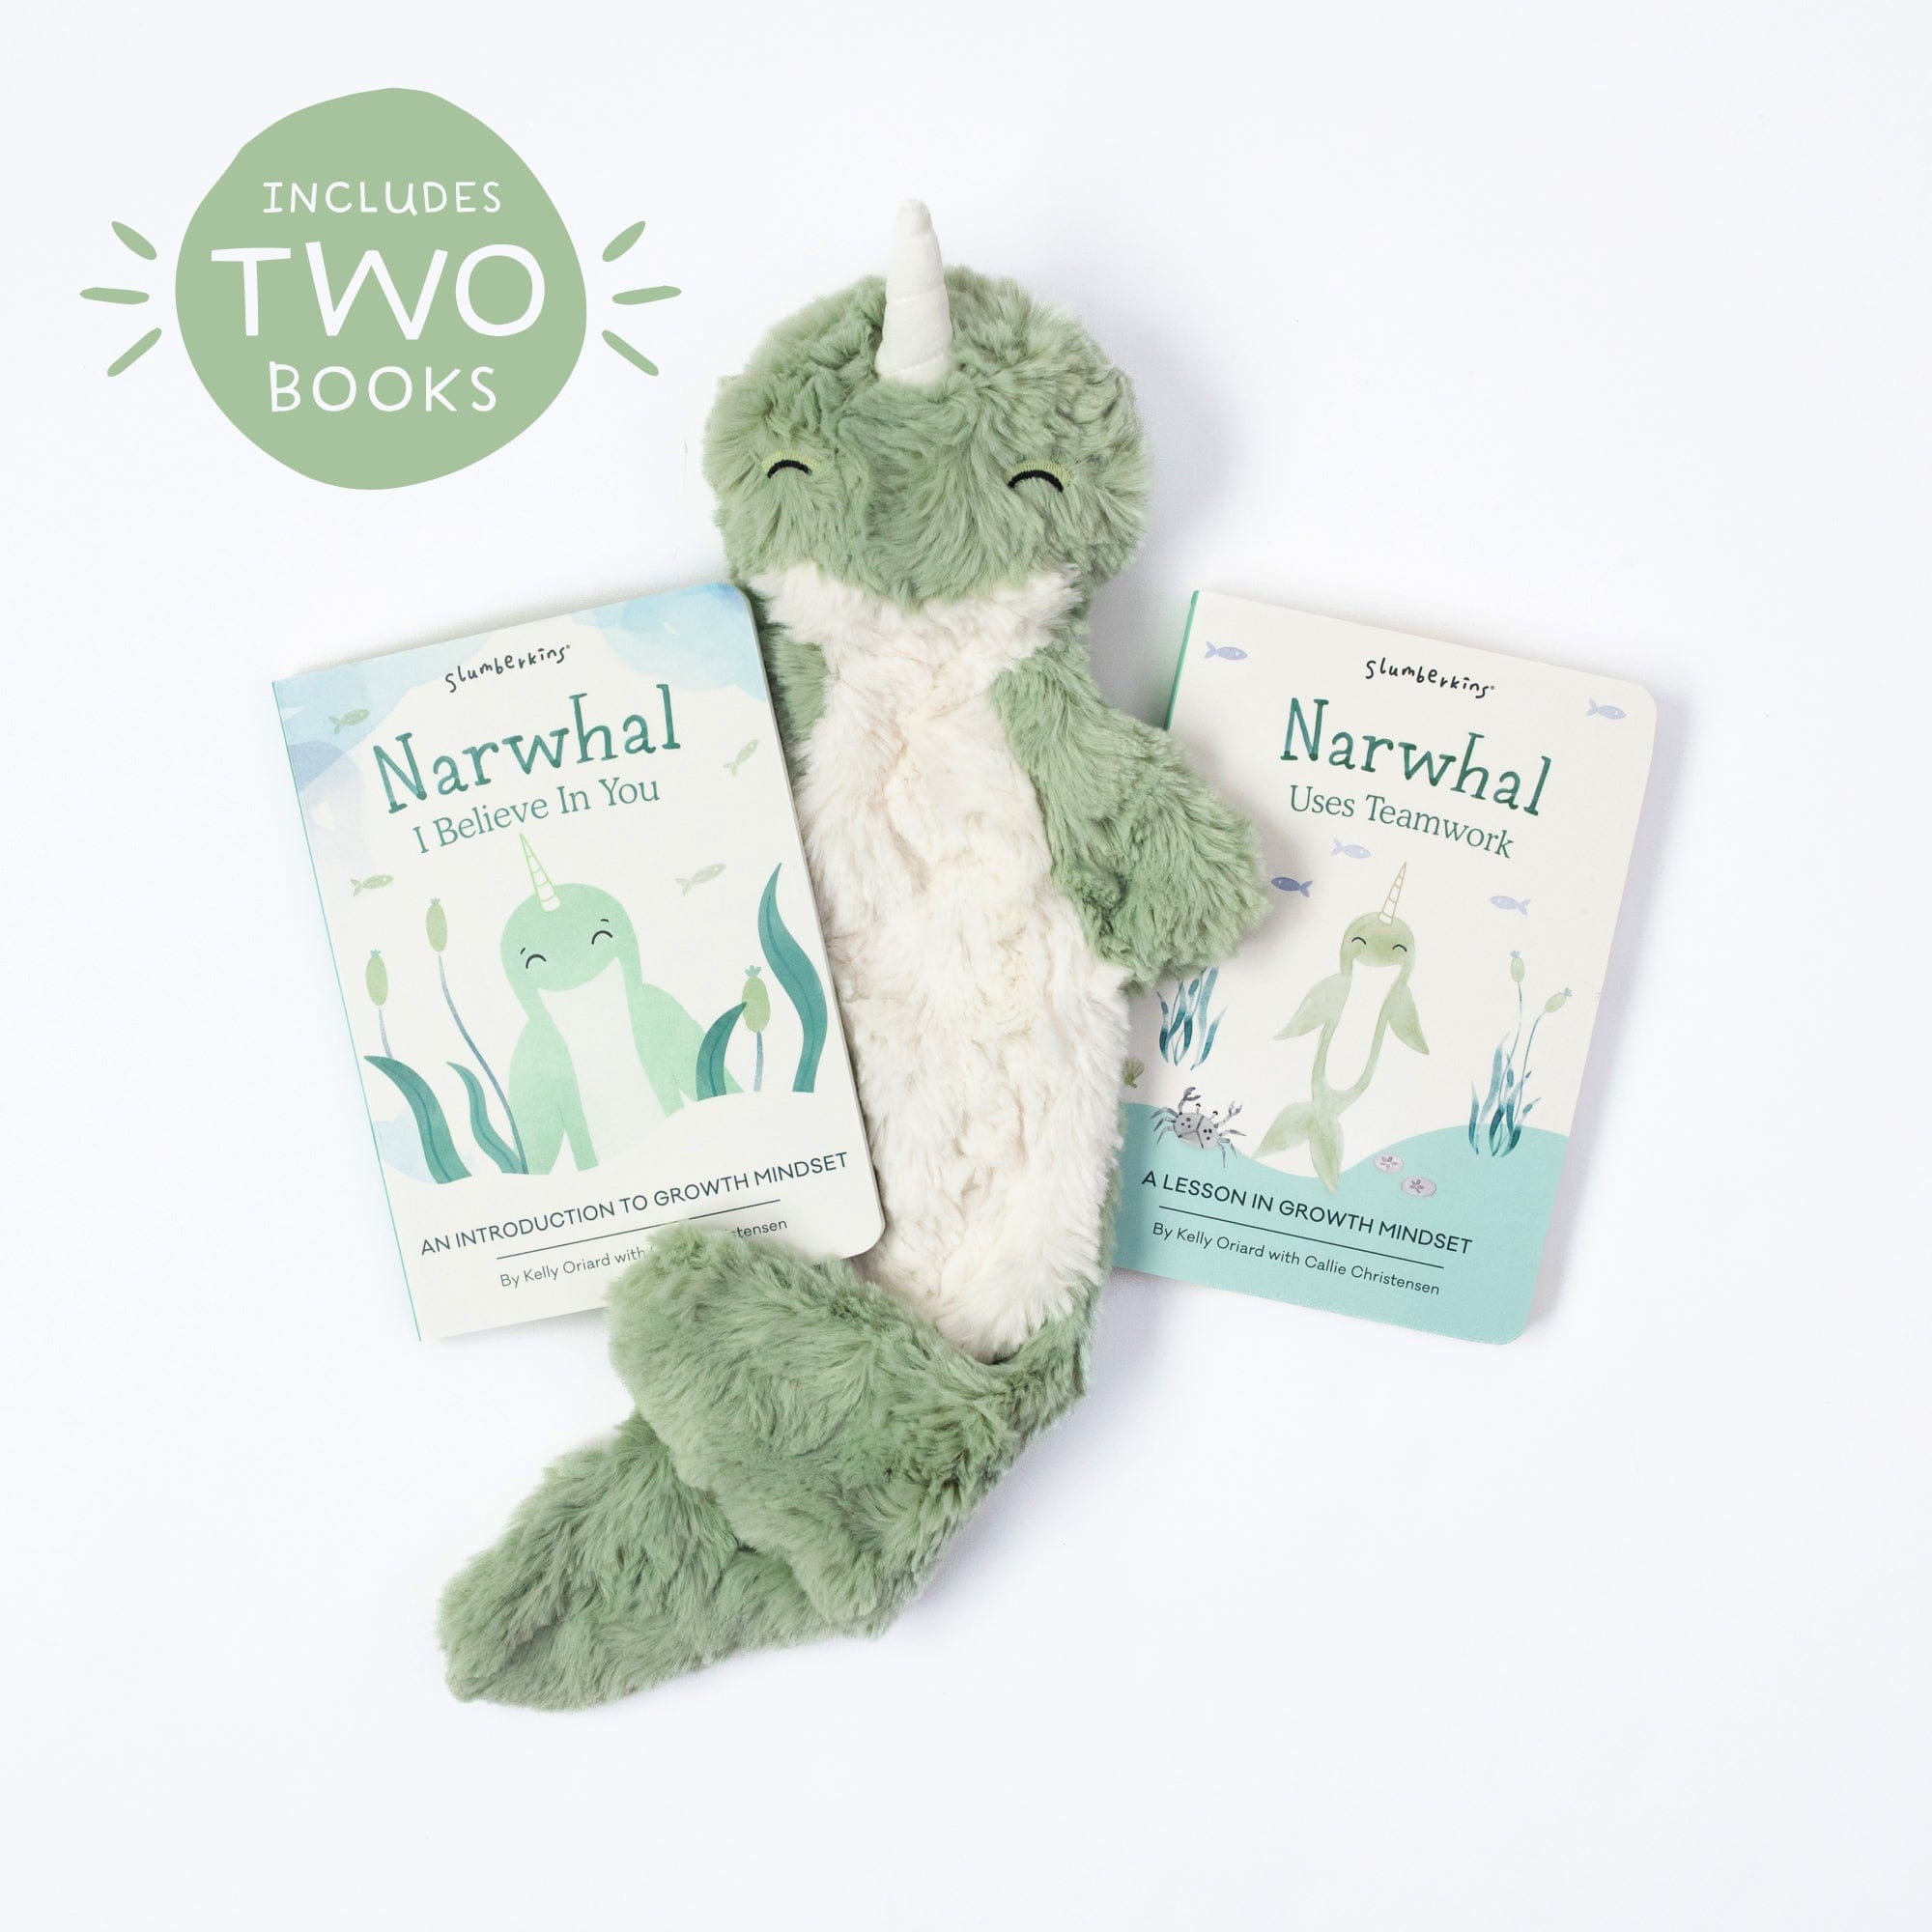 Narwhal Snuggler - View Product